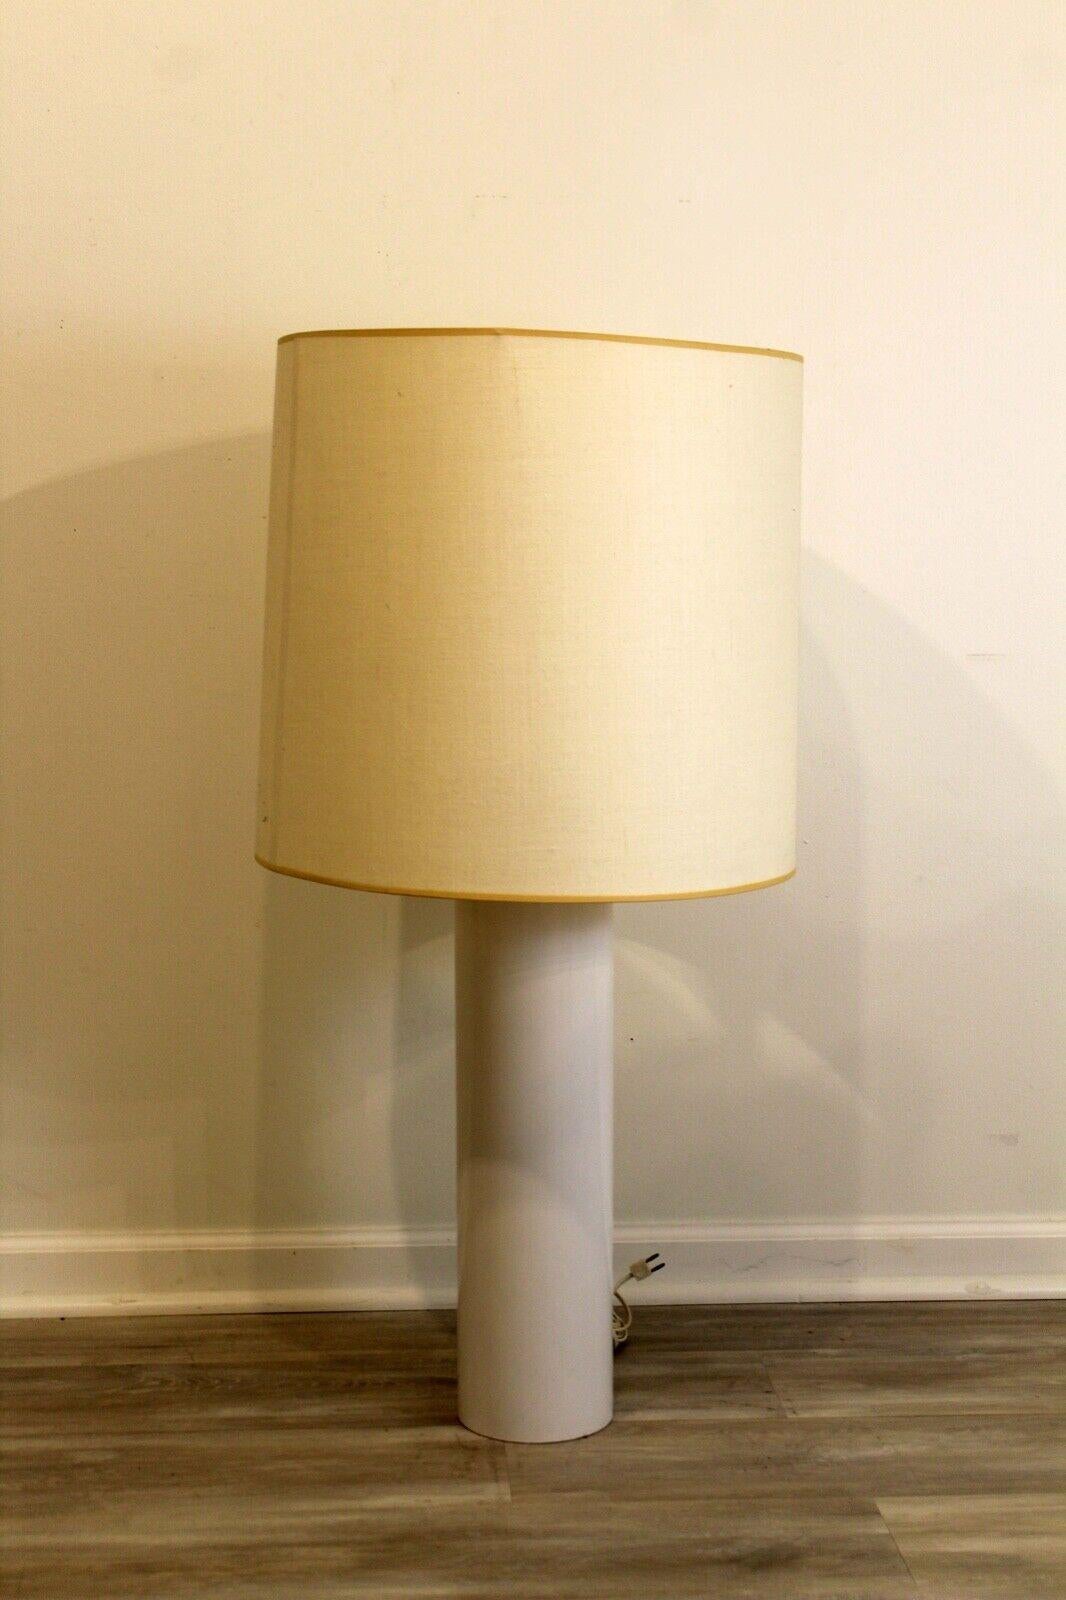 Le Shoppe Too presents this minimalist white tubular ceramic table lamp. Signed Nessen. In very good condition. Dimensions: 18.75